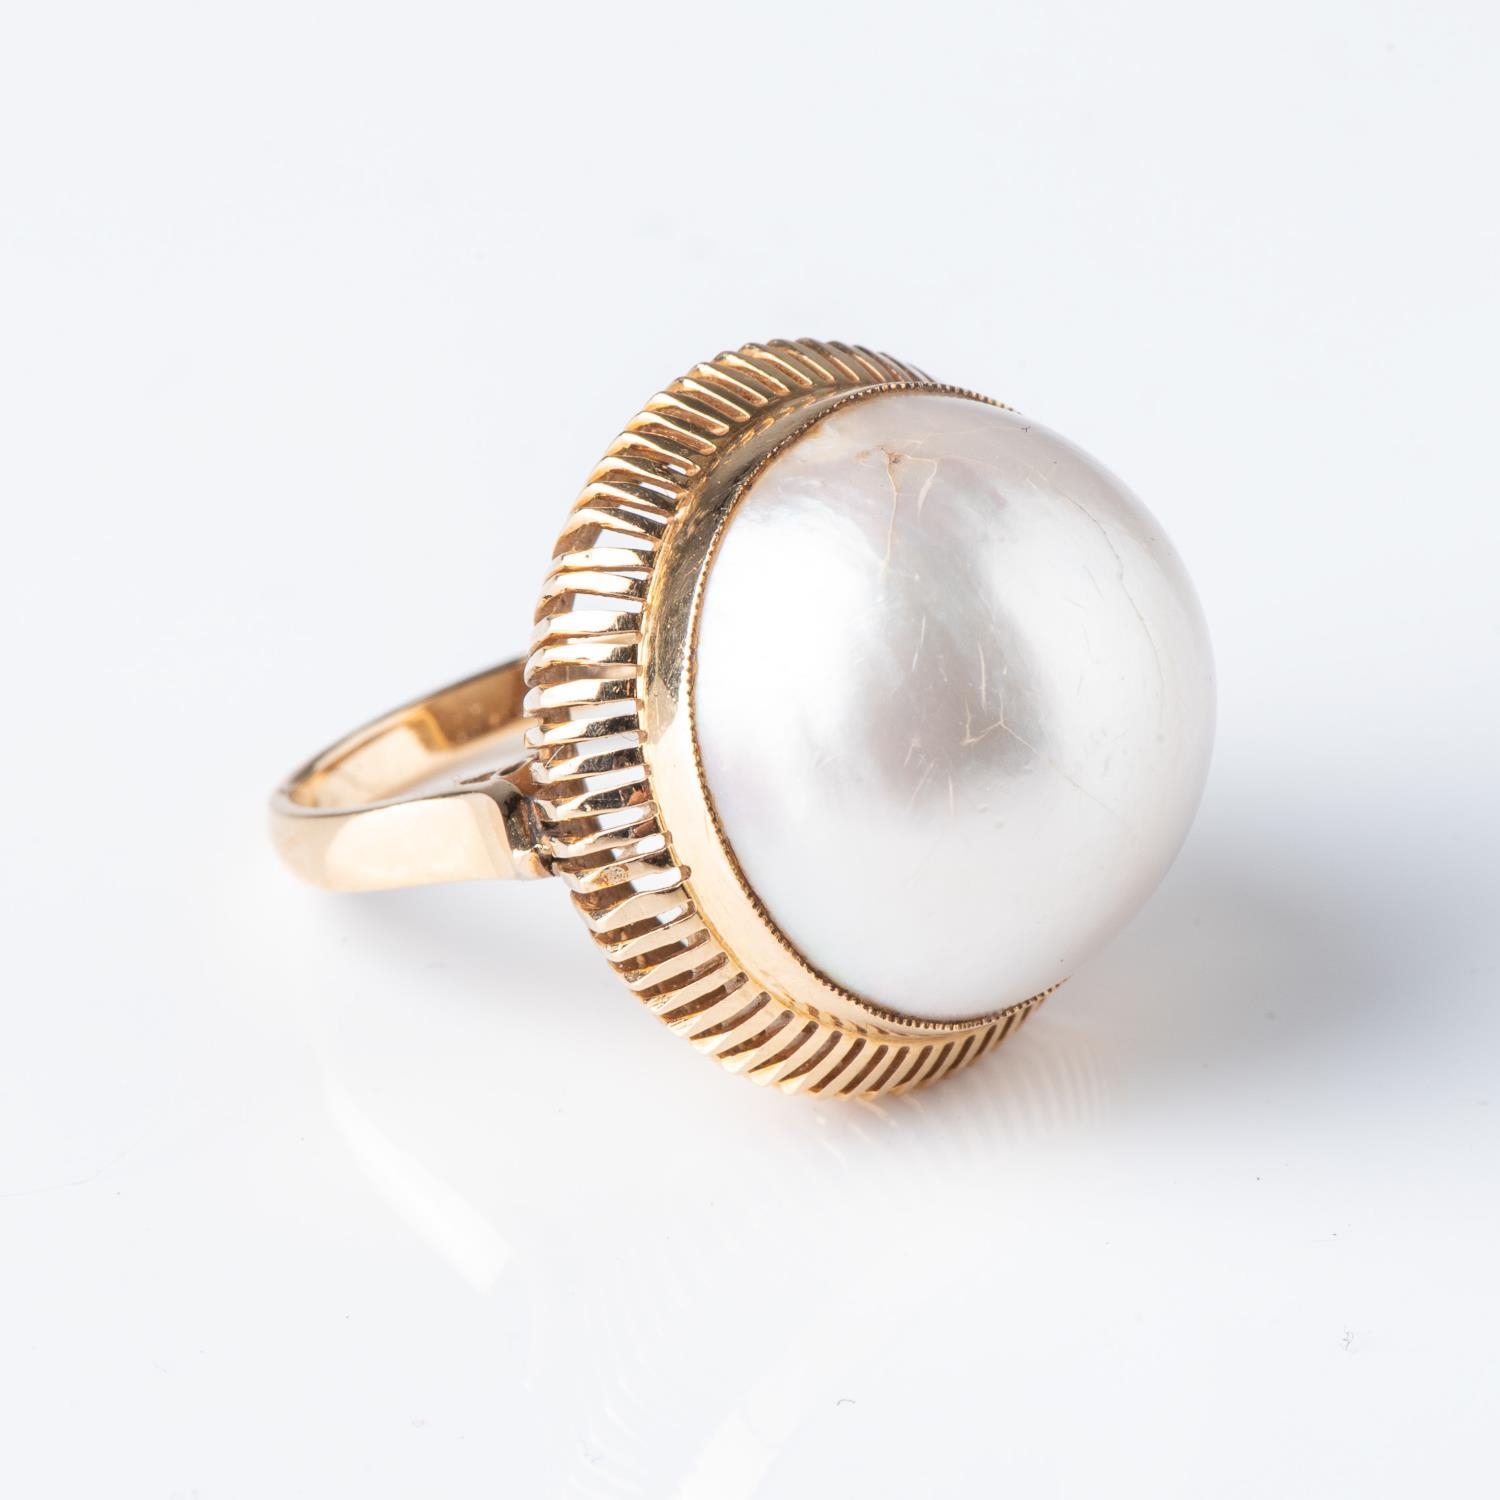 A MABÃ‰ PEARL RING - Image 2 of 3